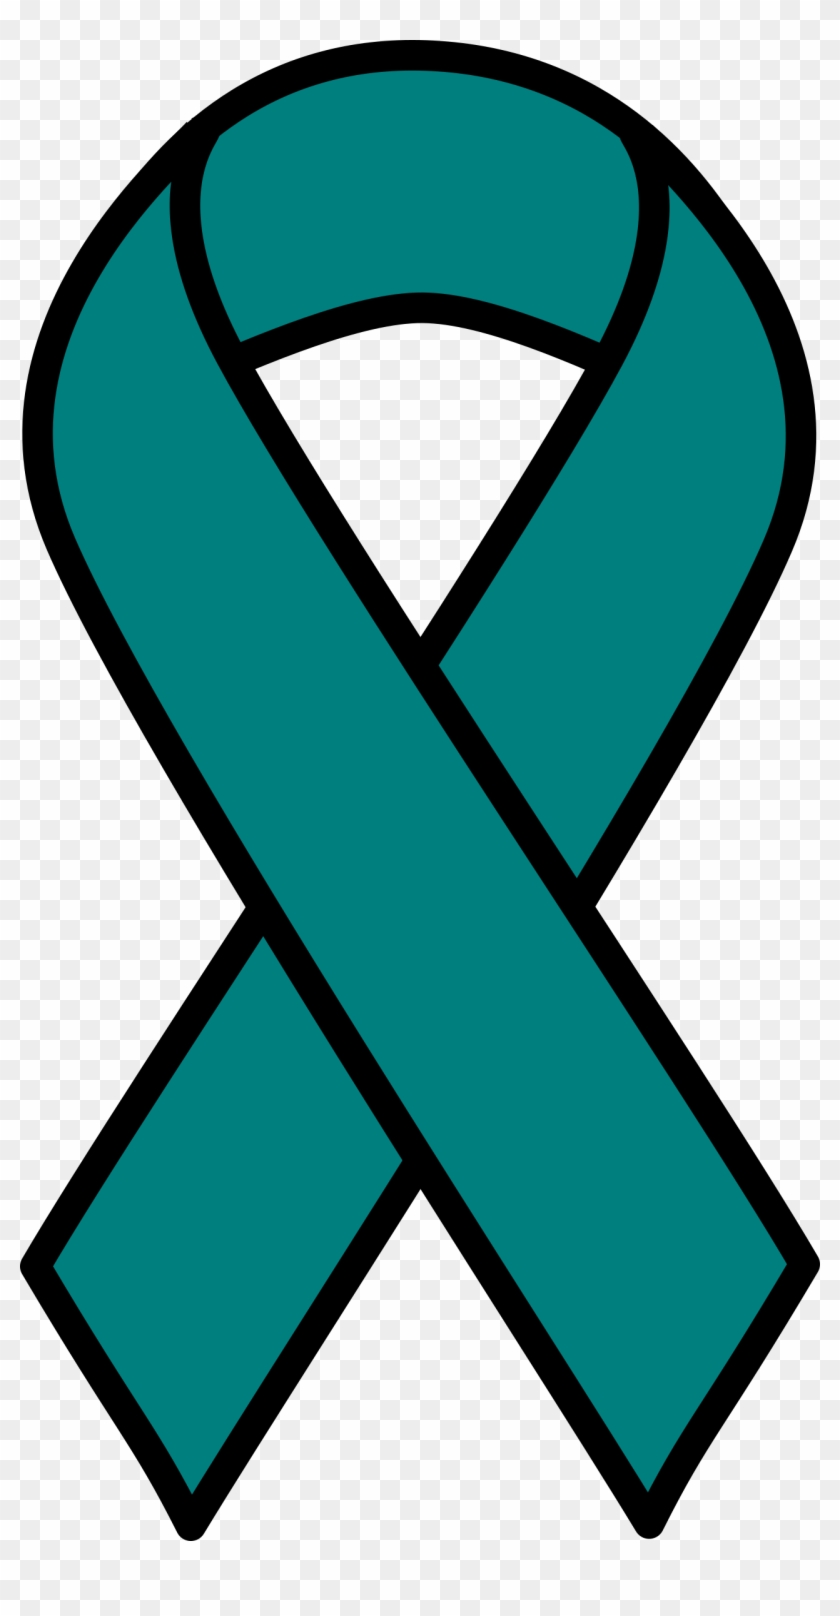 This Free Icons Png Design Of Teal Ovarian Cancer Ribbon Clipart #1721188